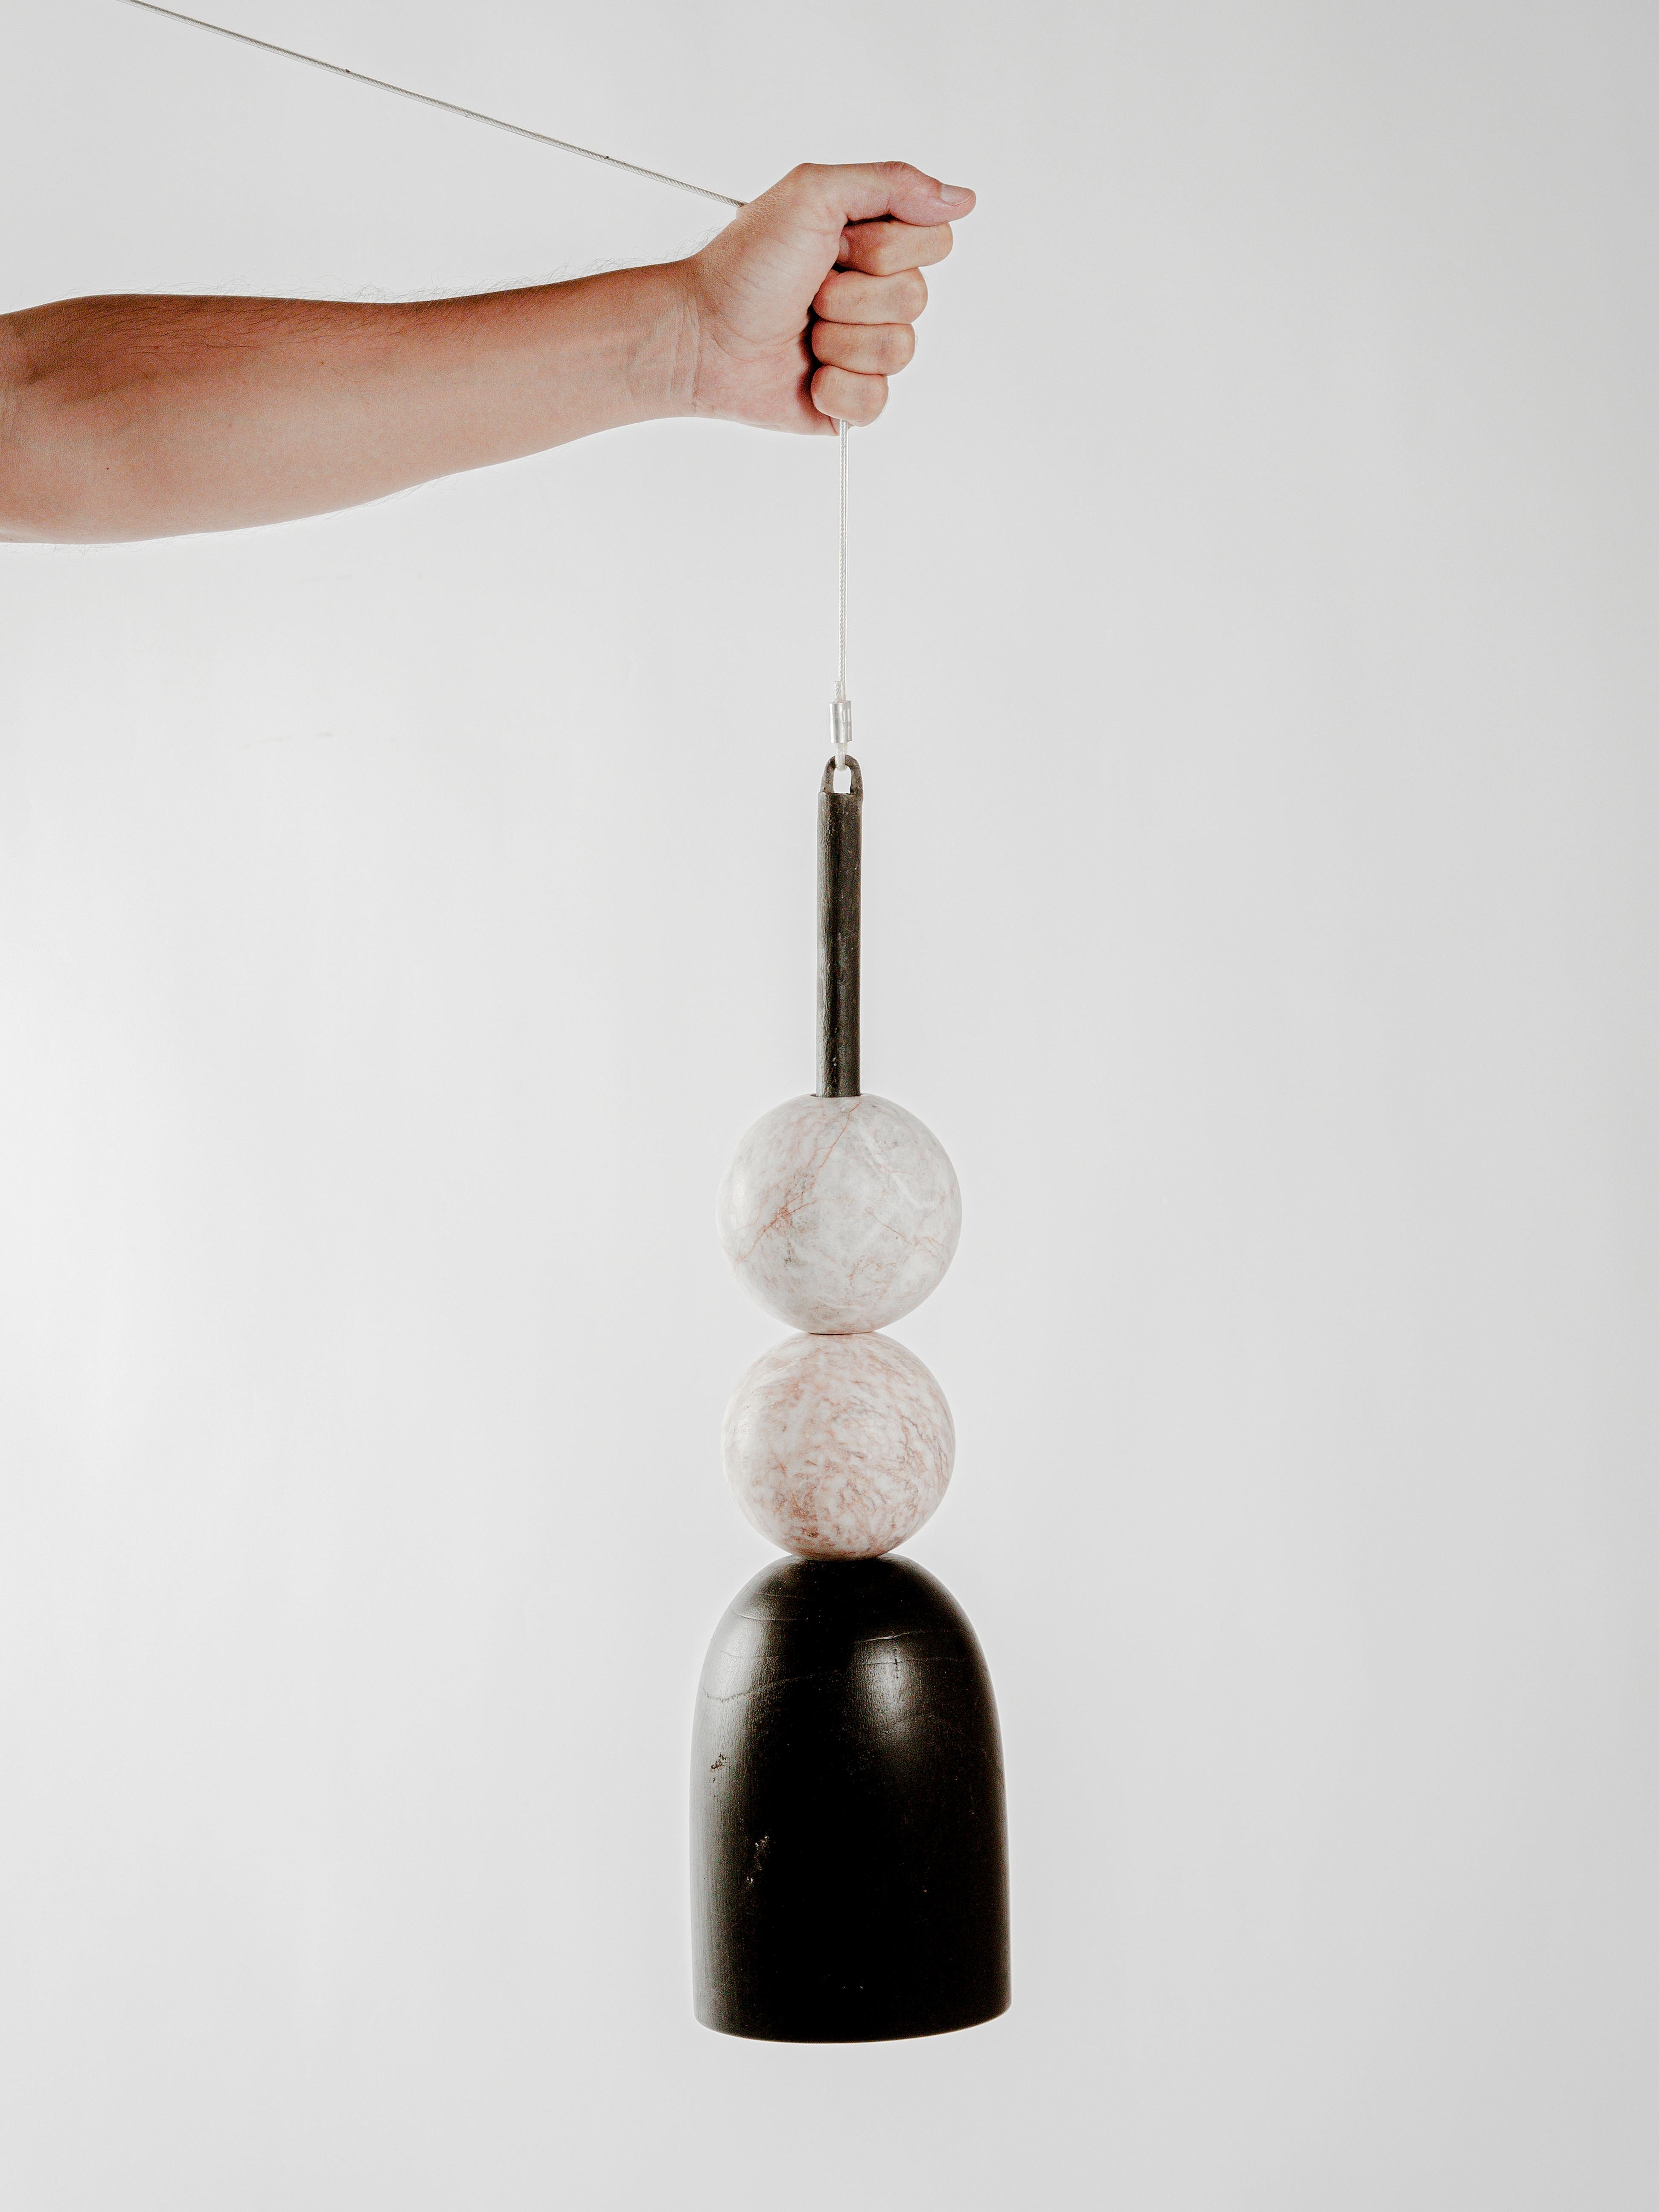 10 Lamp by Daniel Orozco
Dimensions: D 13 x H 40 cm.
Materials: Wood, Marble

Black wood -based pendant lamp and 2 pink marble balls. Handmade by Mexican artisans.

All our lamps can be wired according to each country. If sold to the USA it will be